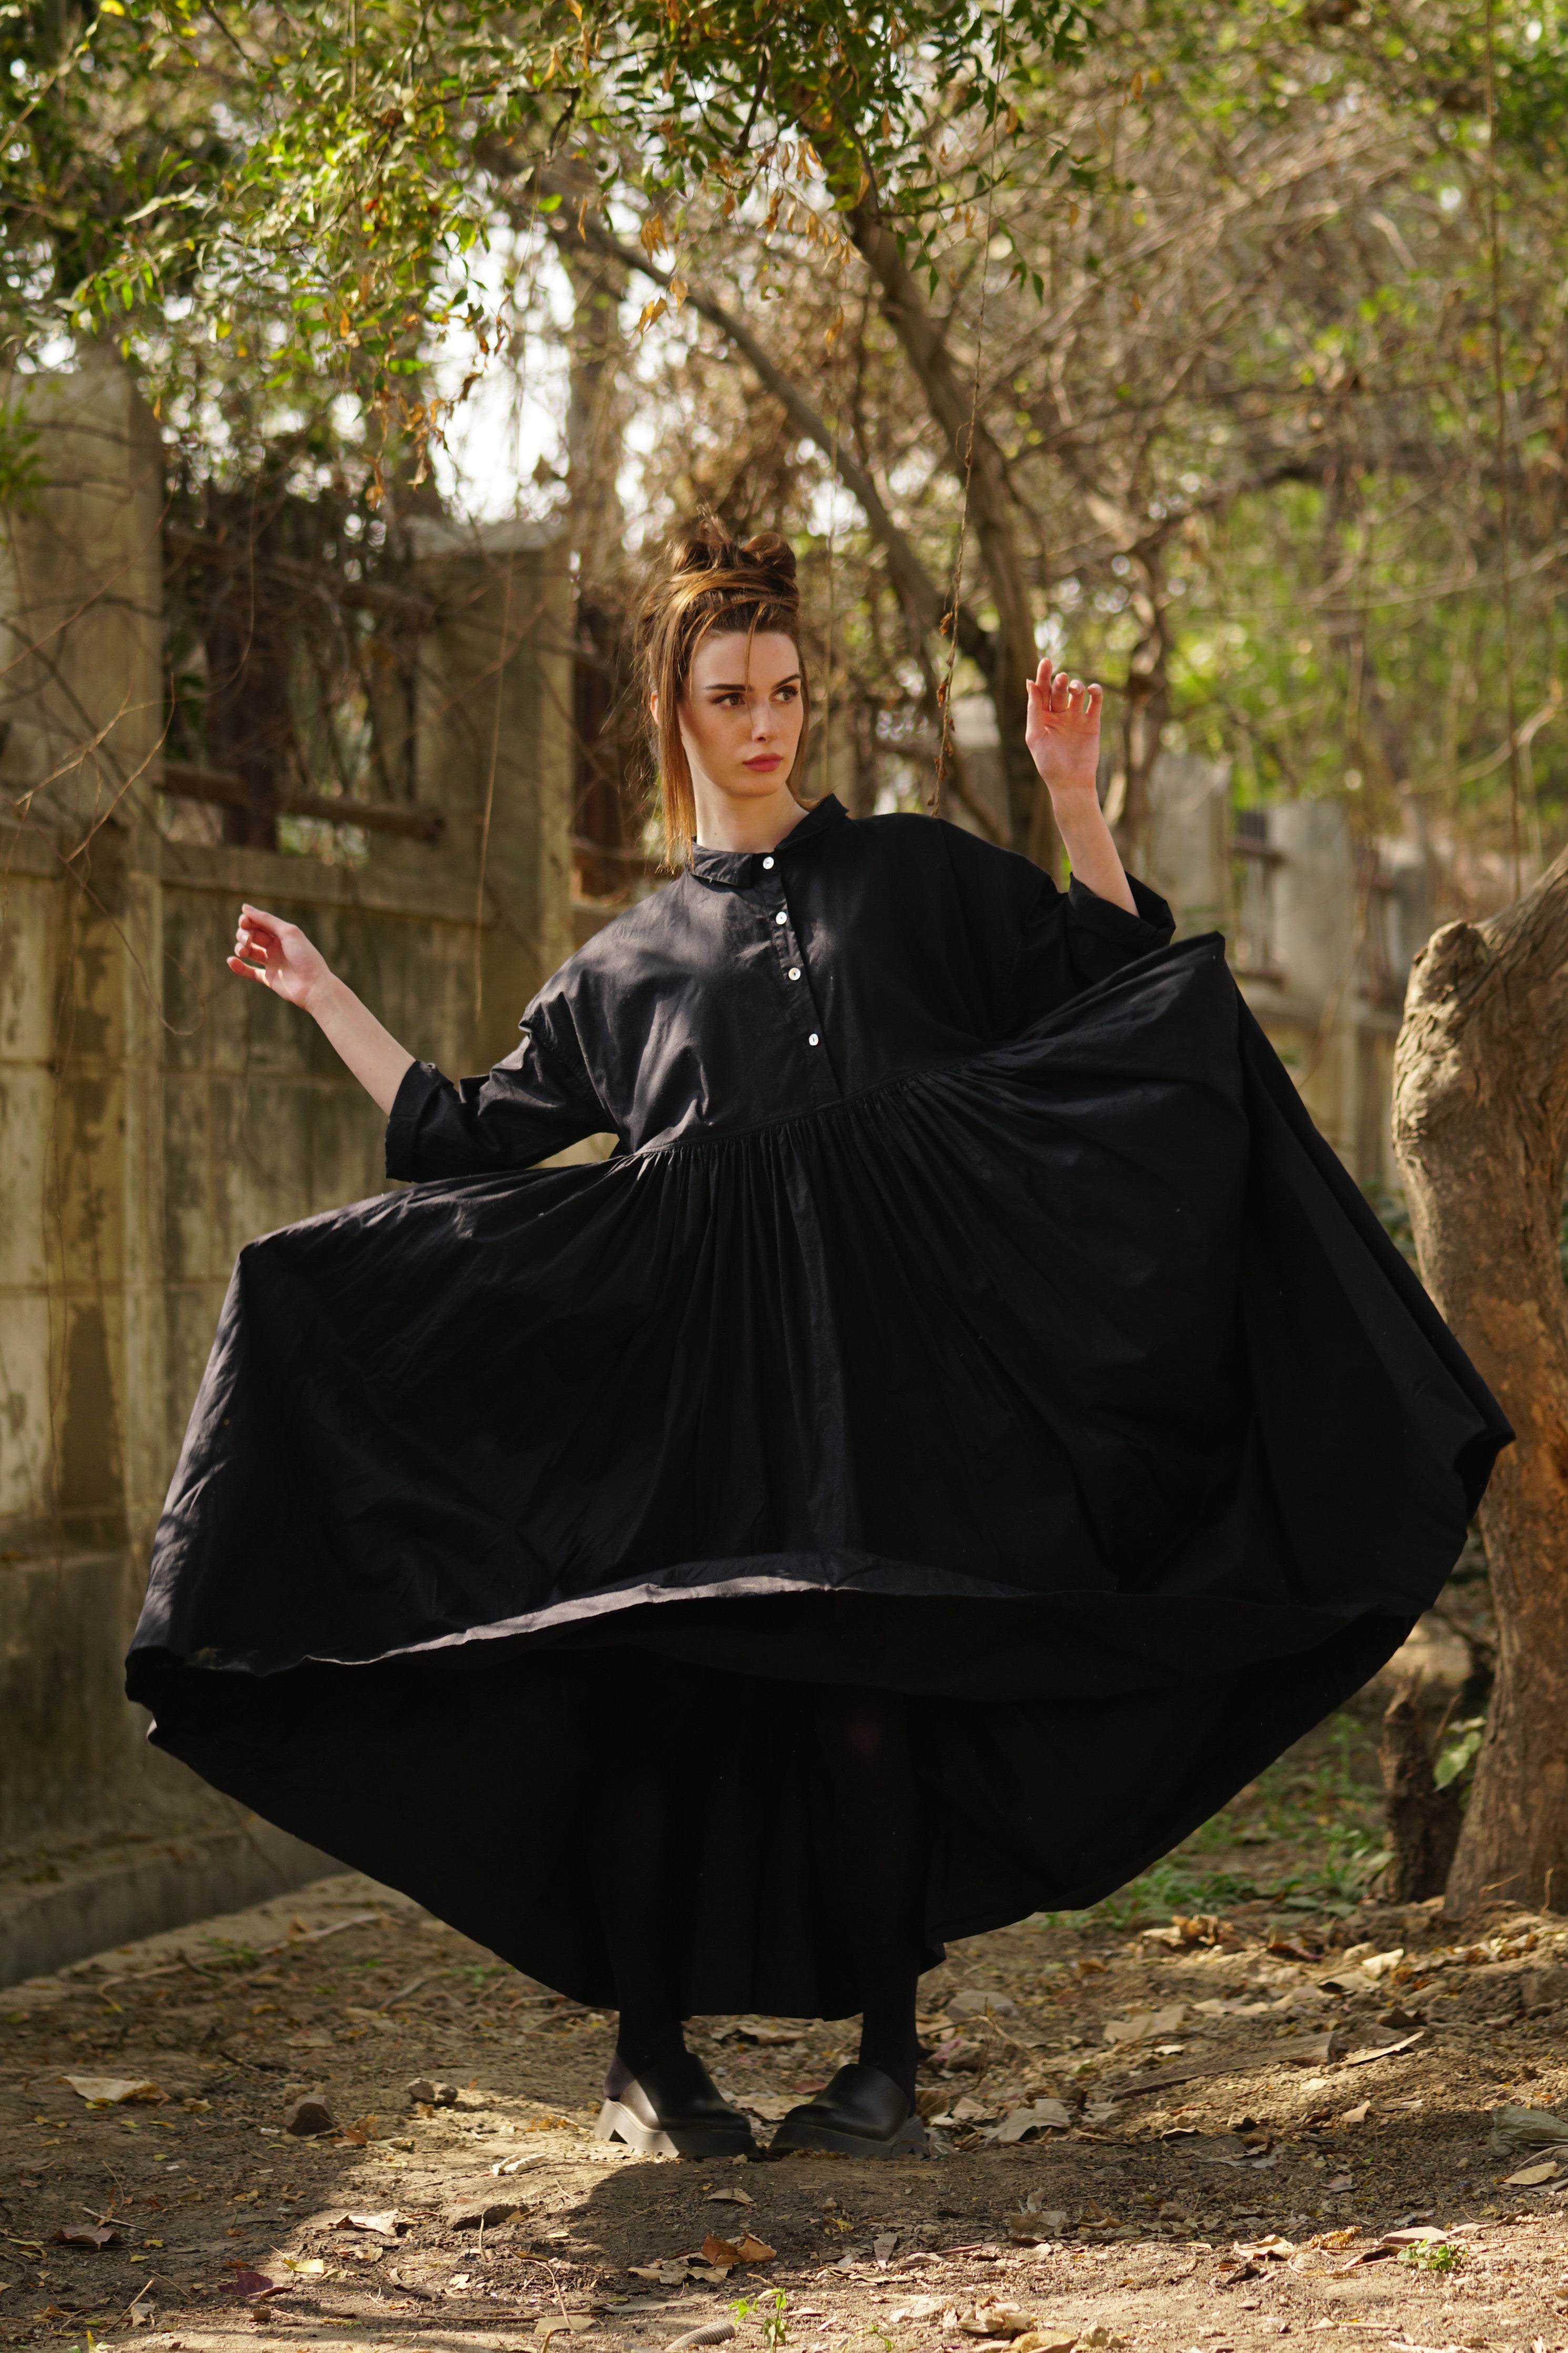 A MegbyDesign model is wearing a long, black, dress with side pockets, double stitching and a tiny collar